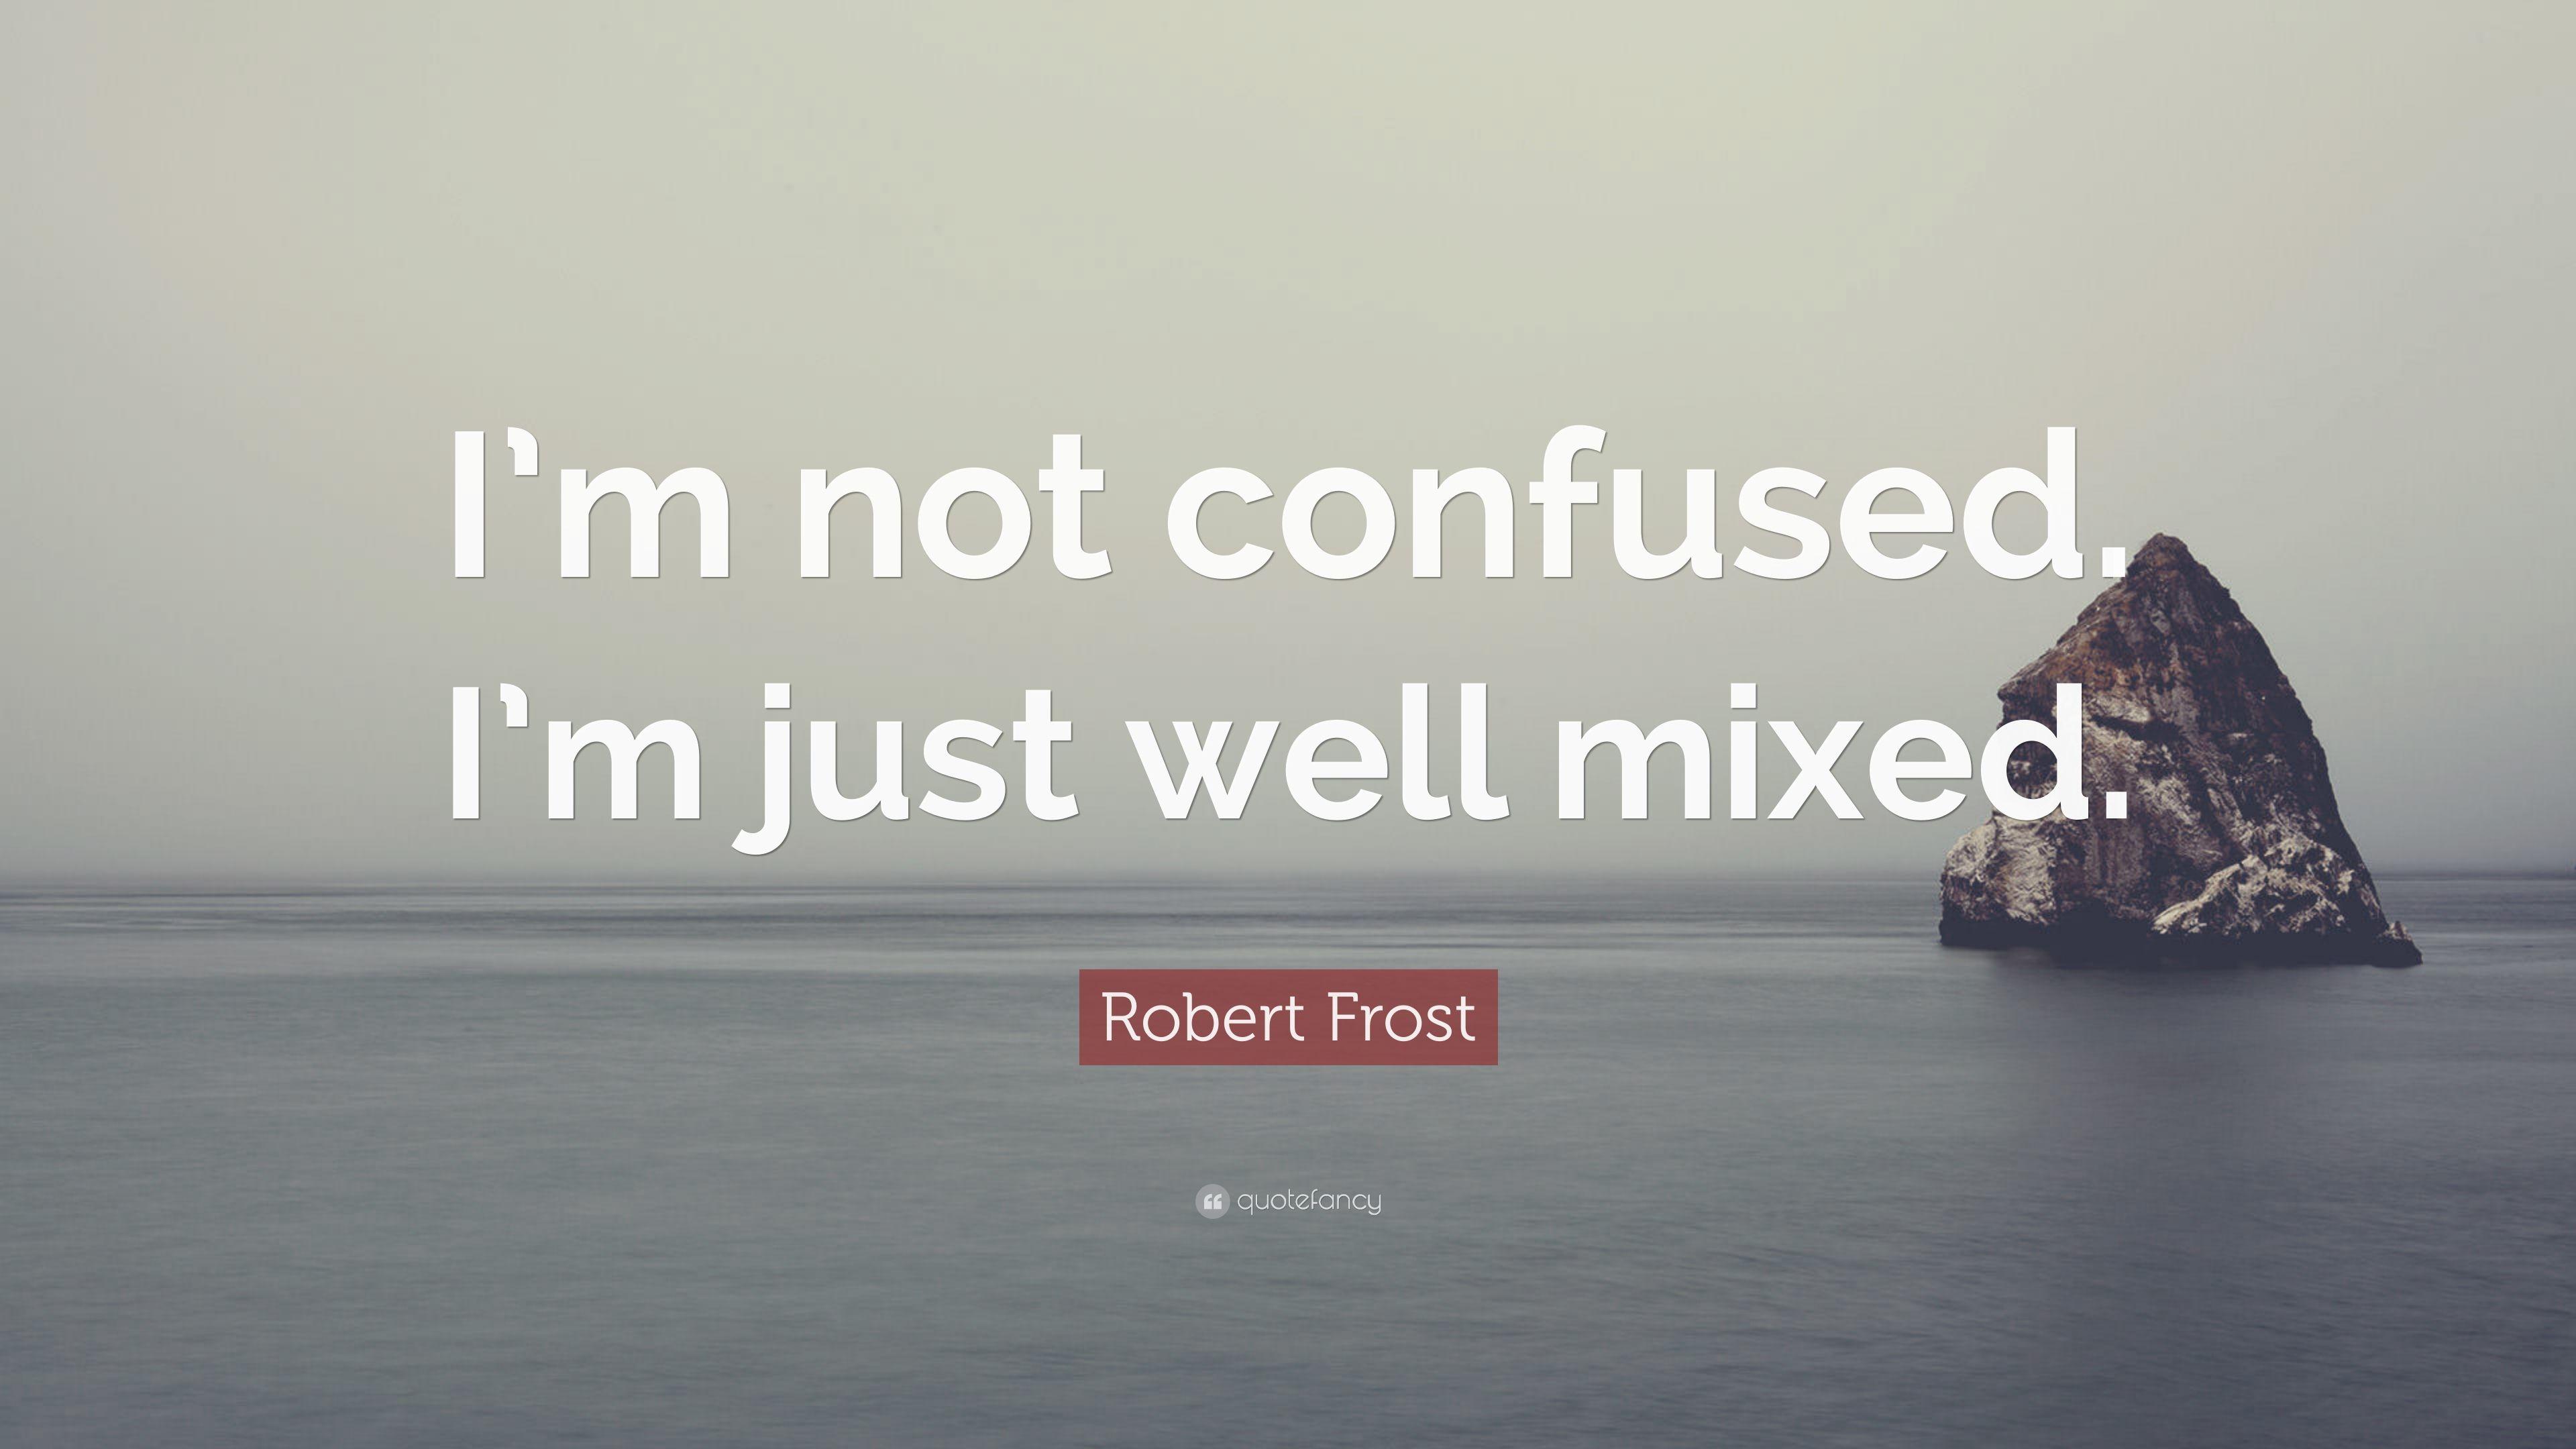 Robert Frost Quote: “I'm not confused. I'm just well mixed.” 10